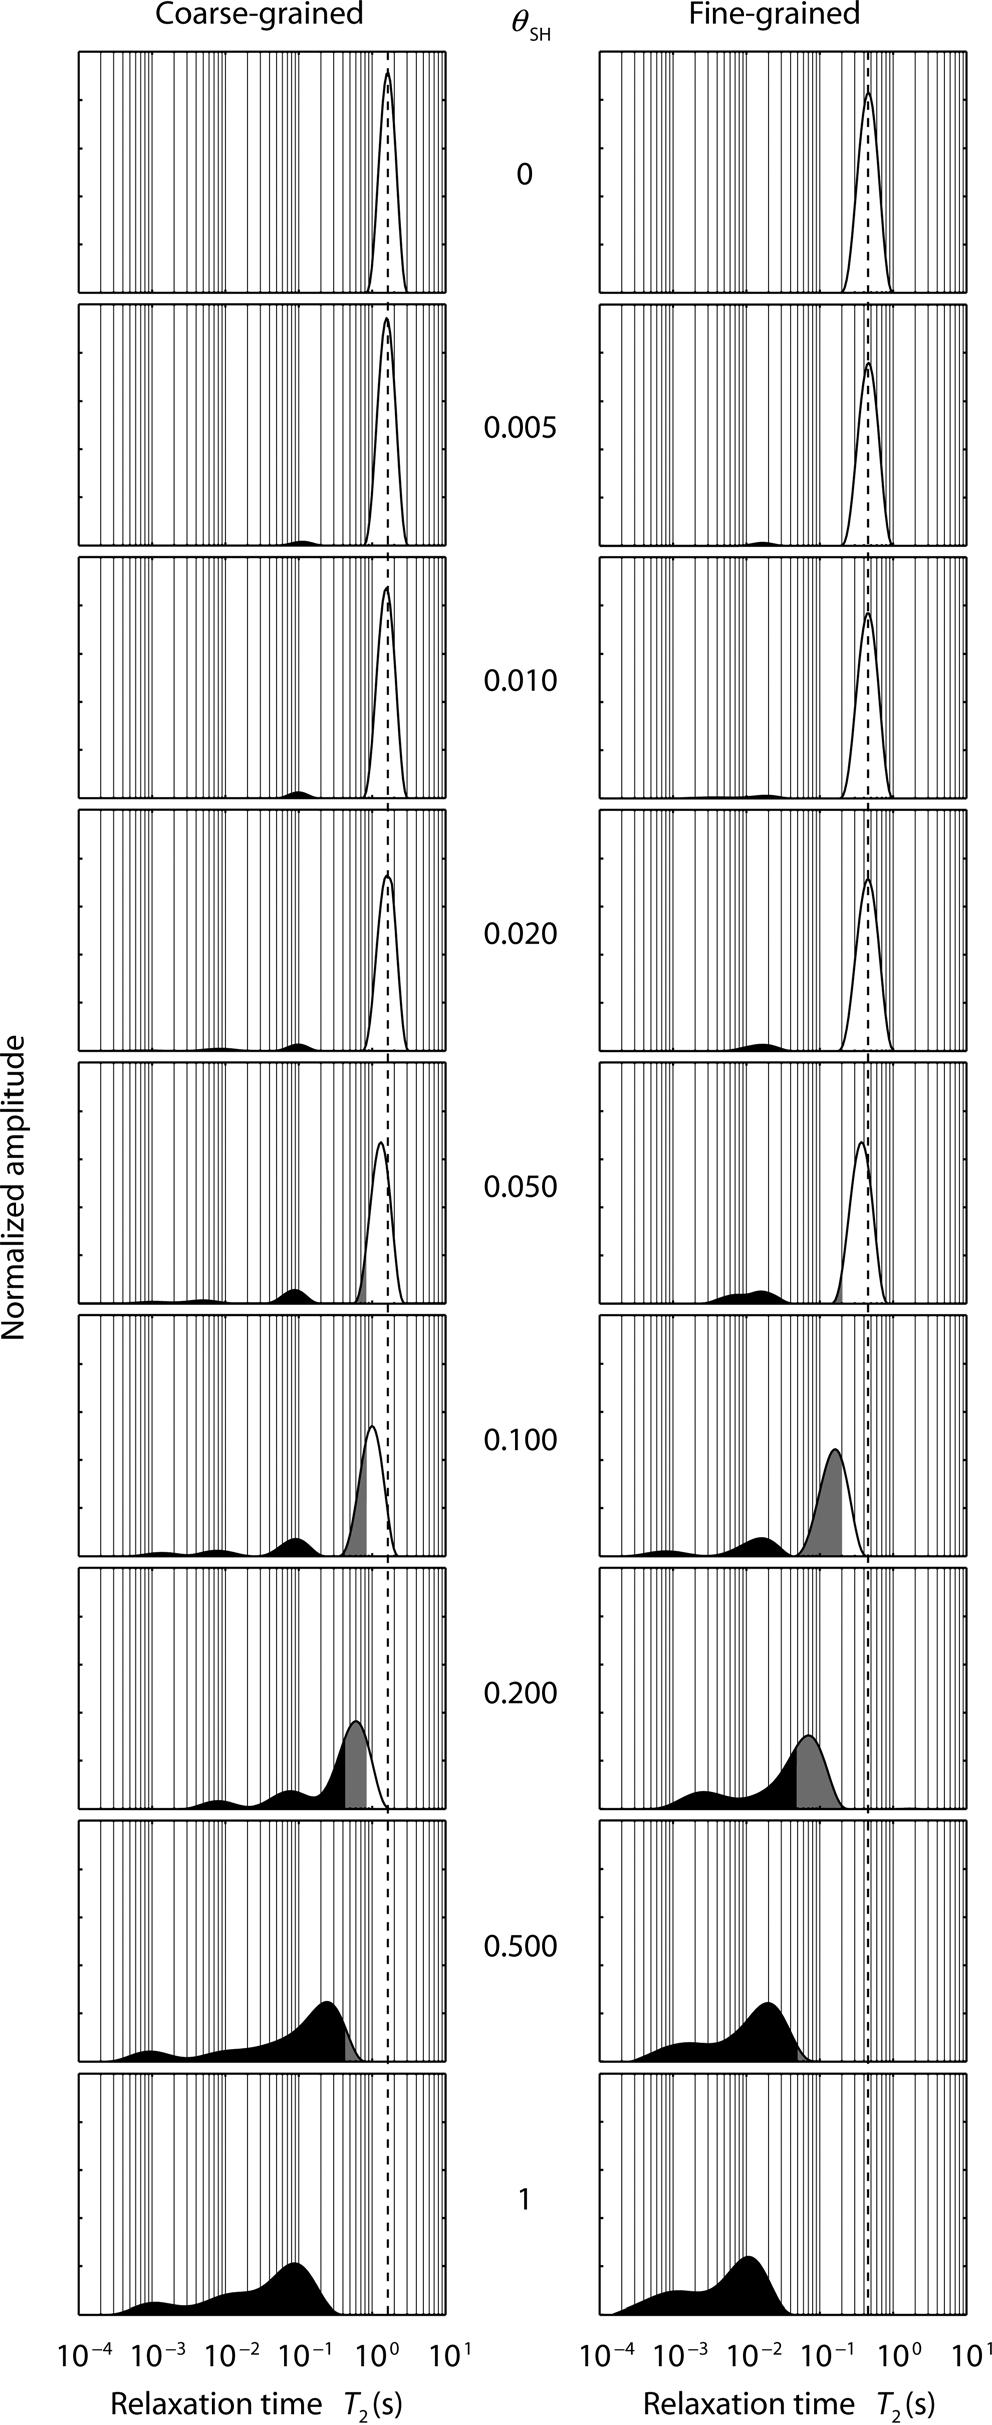 NMR in unconsolidated sediments G79 length S and the diffusion length D, which varies with grain size and mineral concentration.